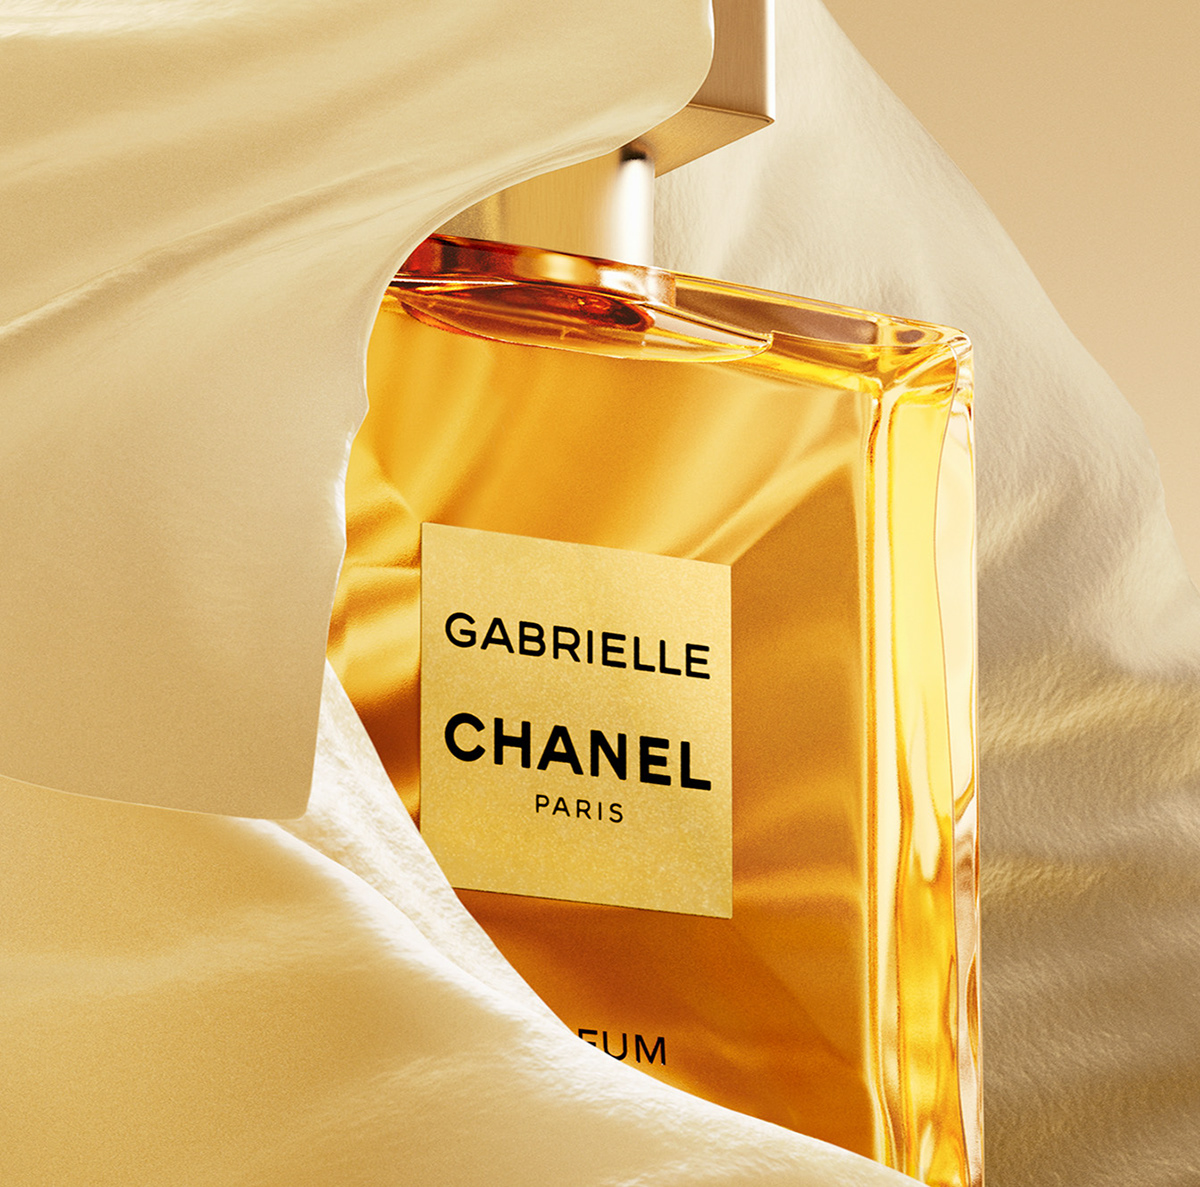 Post Production retouch beauty perfume chanel CGI 3D Render